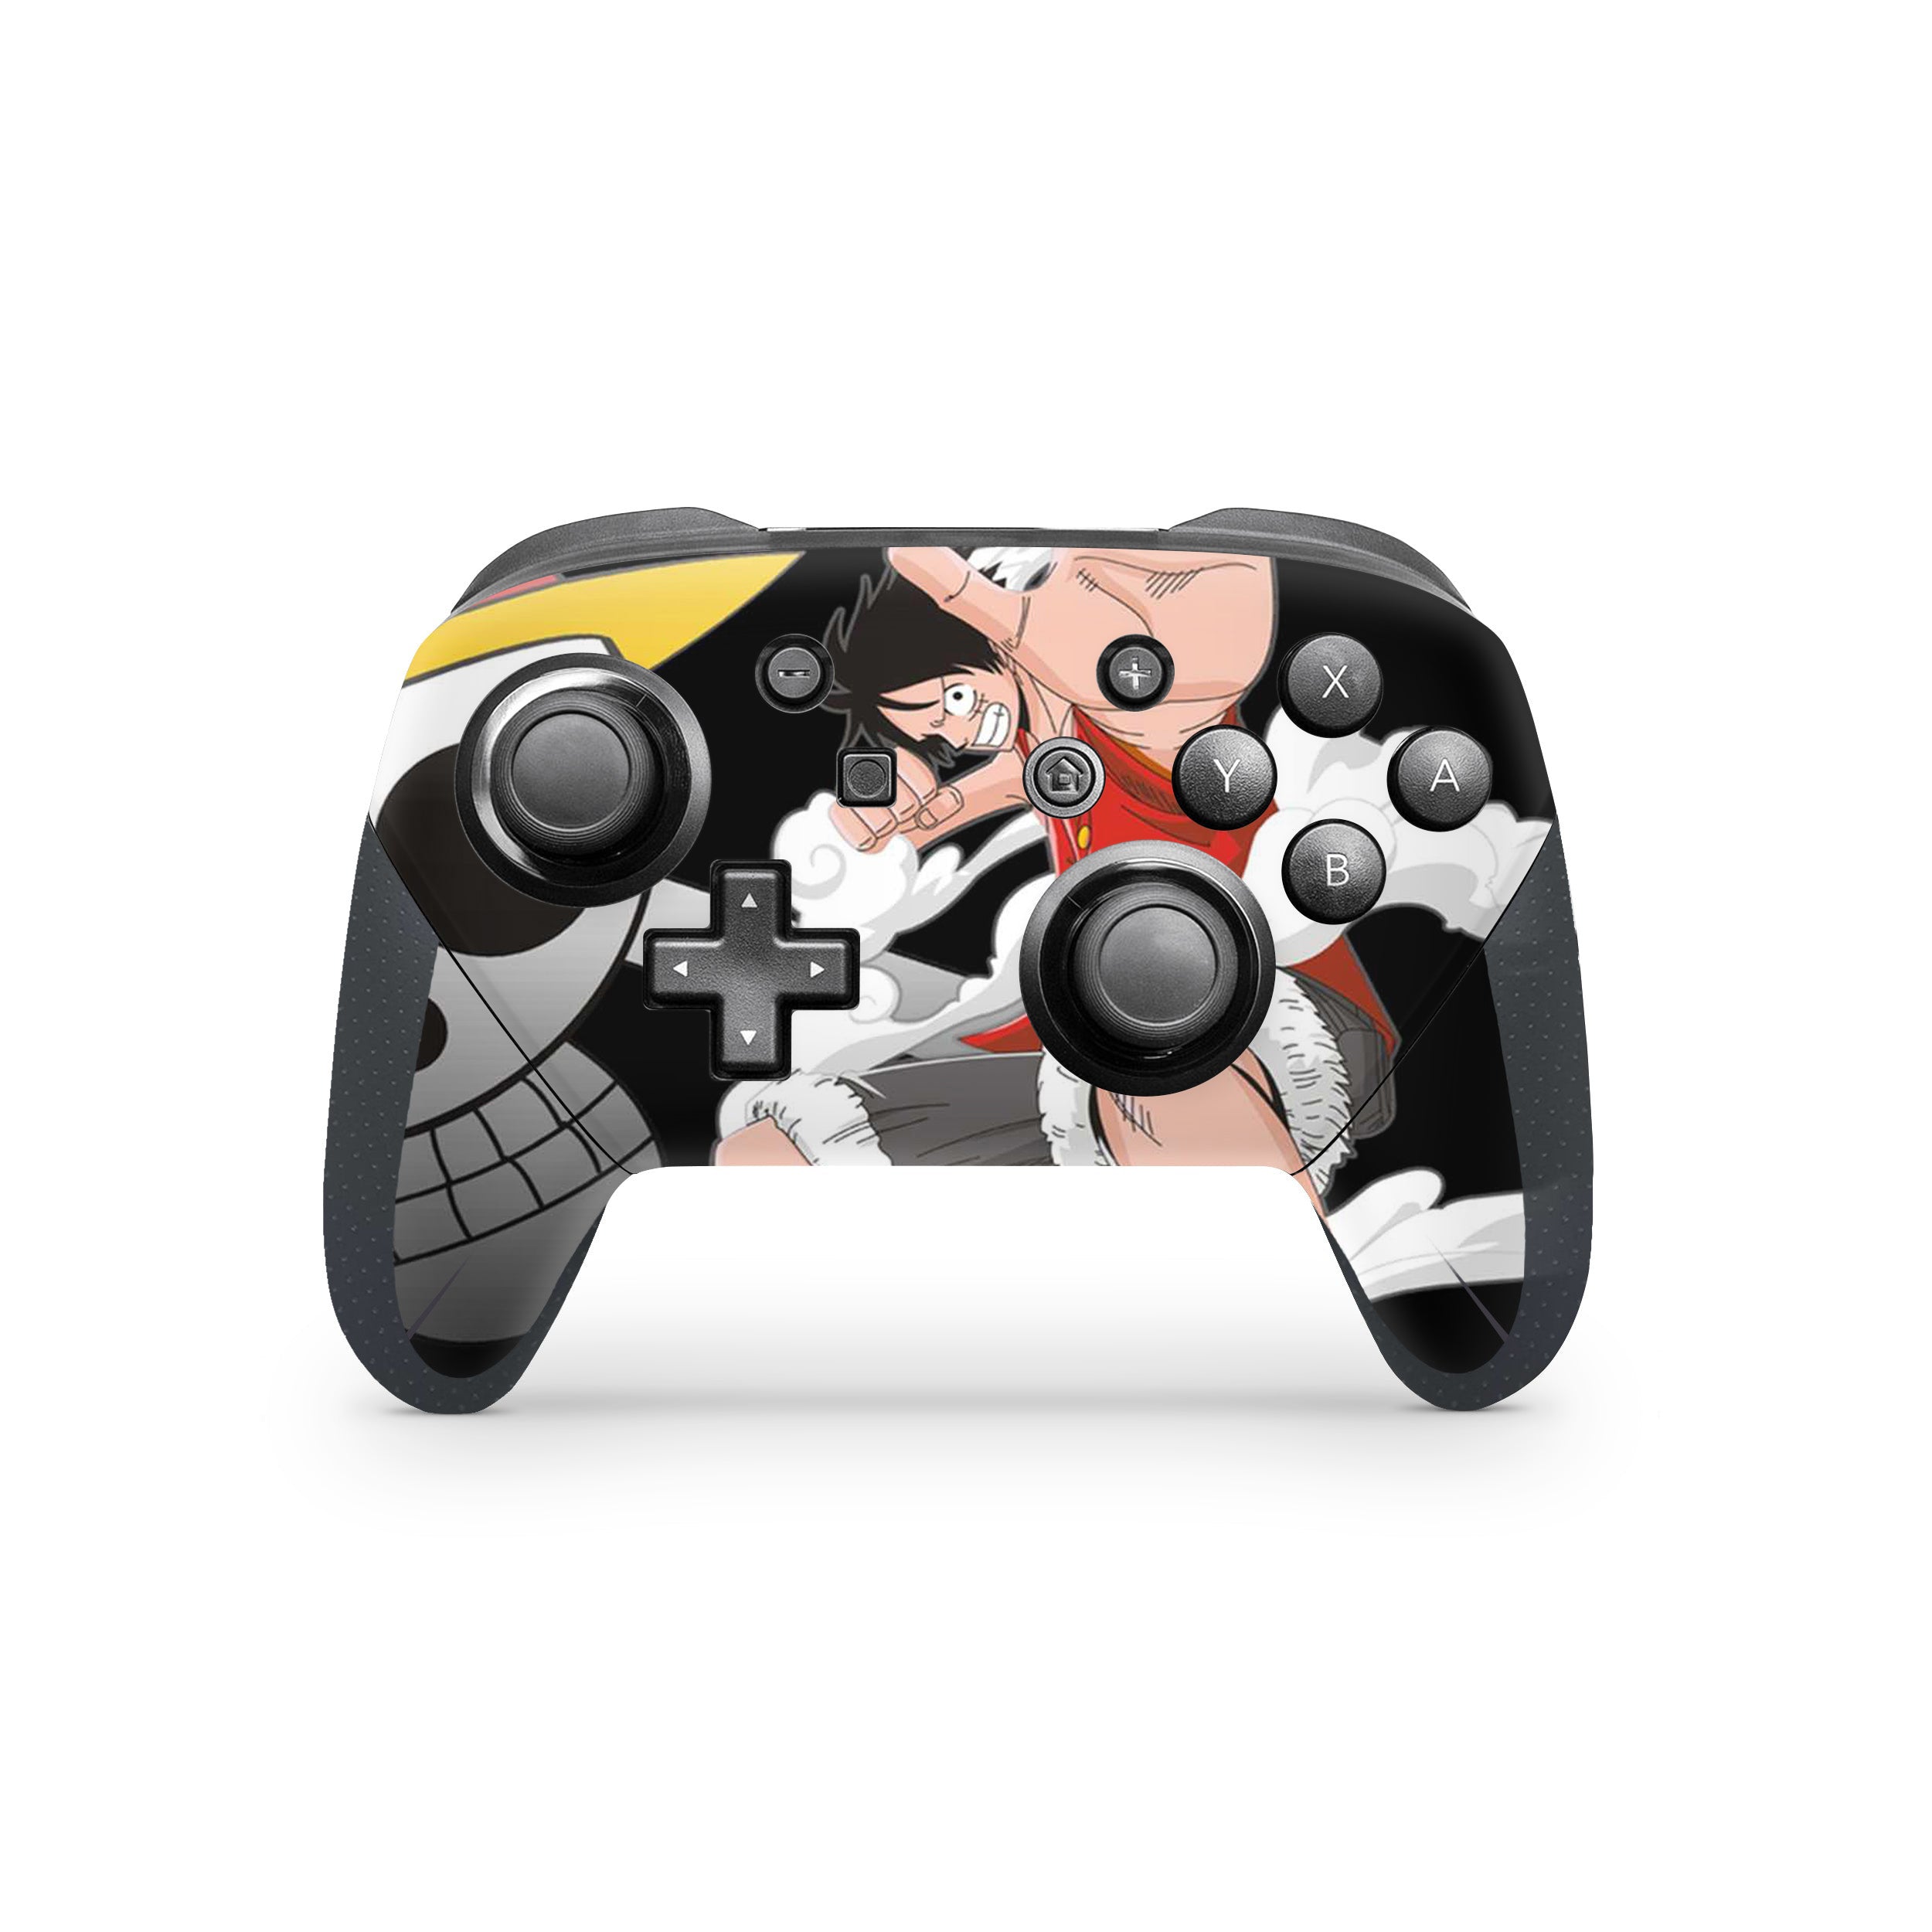 A video game skin featuring a One Piece Monkey D Luffy design for the Switch Pro Controller.